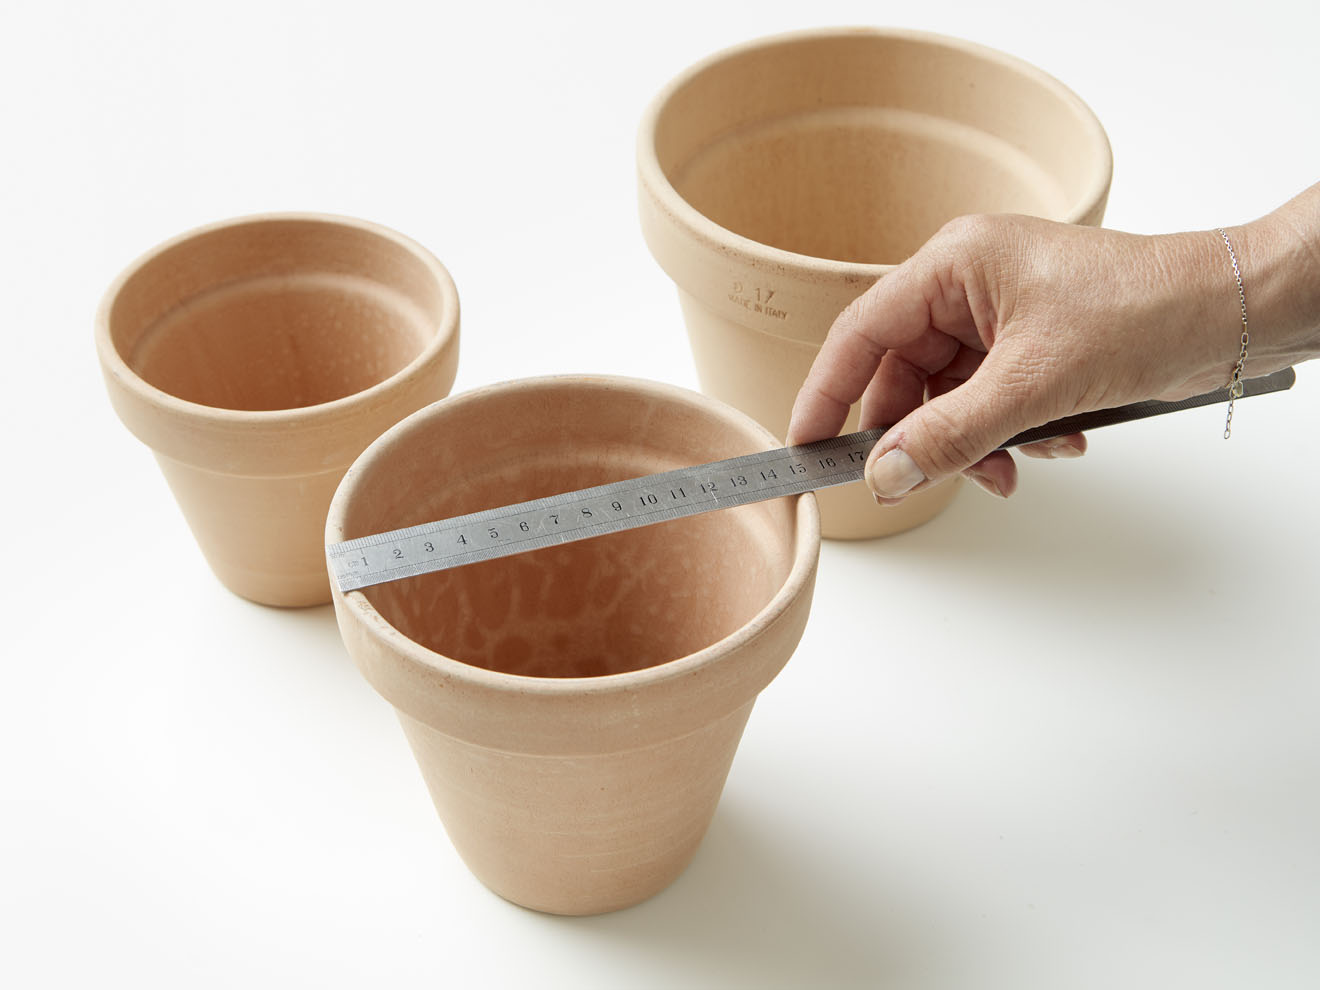 measure your flower pots to make the right size holes in your shelves.